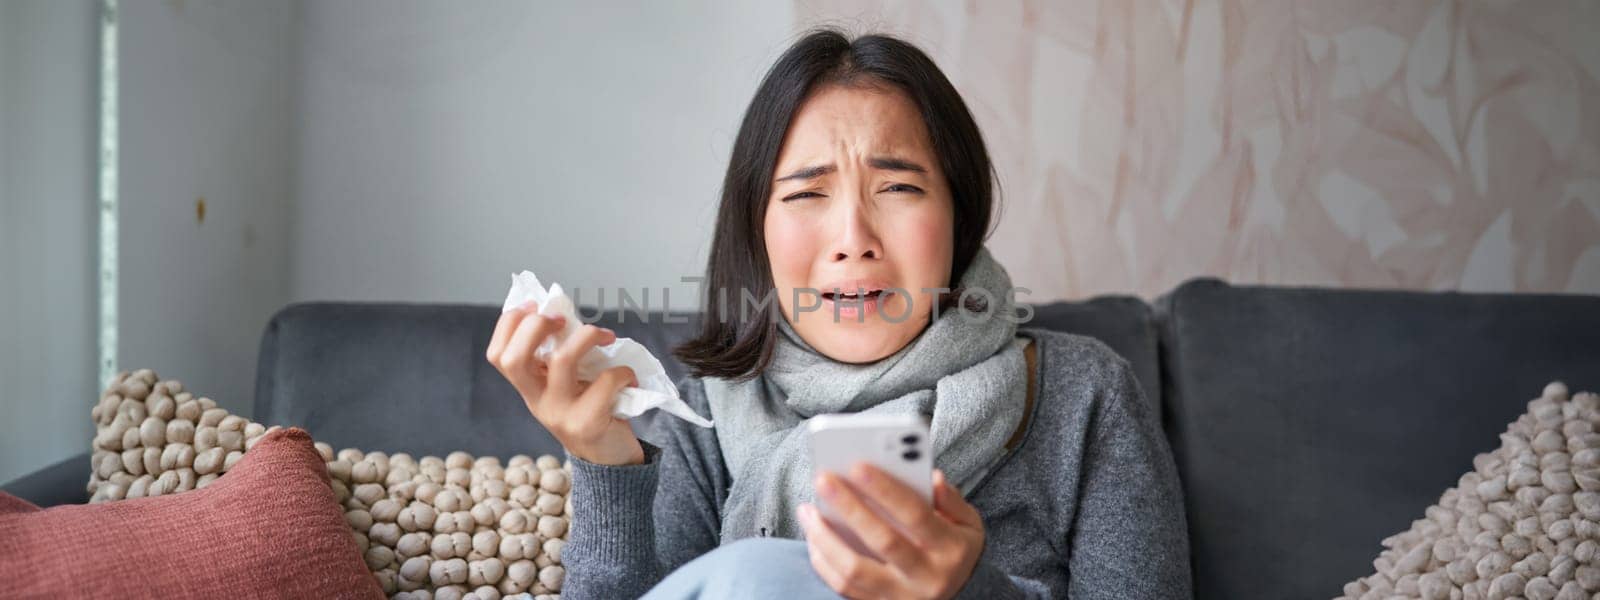 Asian girl with influenza, sits at home, cries and looks upset, holds smartphone, feels unwell and gloomy, wearing warm clothes.